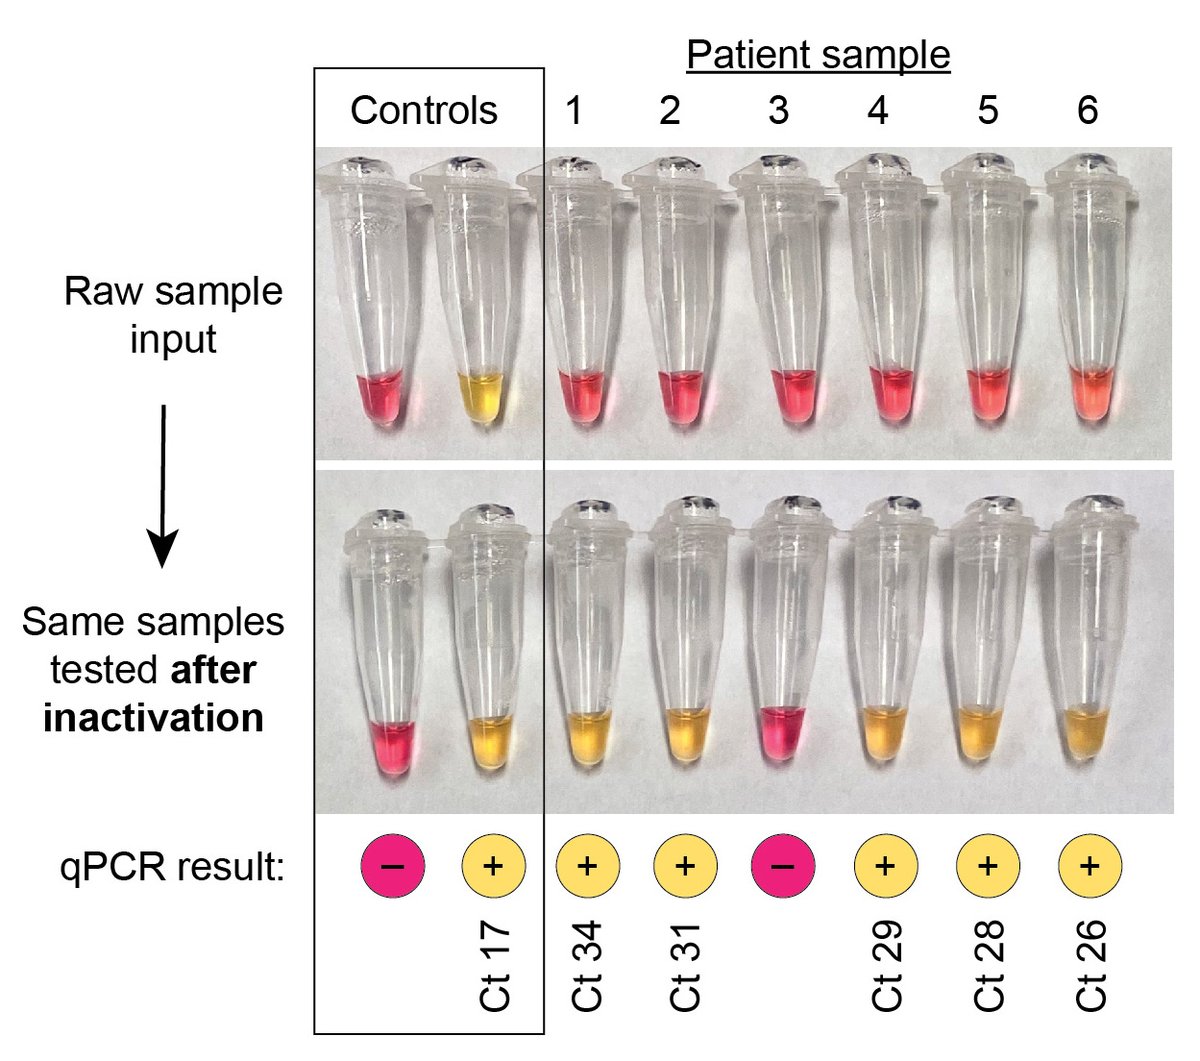 Inactivation pre-LAMP had huge benefit: clinical samples with Ct 26-34 that were previously LAMP- but PCR+ were now LAMP+ too (top= 5 µL saline added directly to LAMP rxn, bottom = 5 µL of same sample tested after 5-min inactivation step).(13/n)